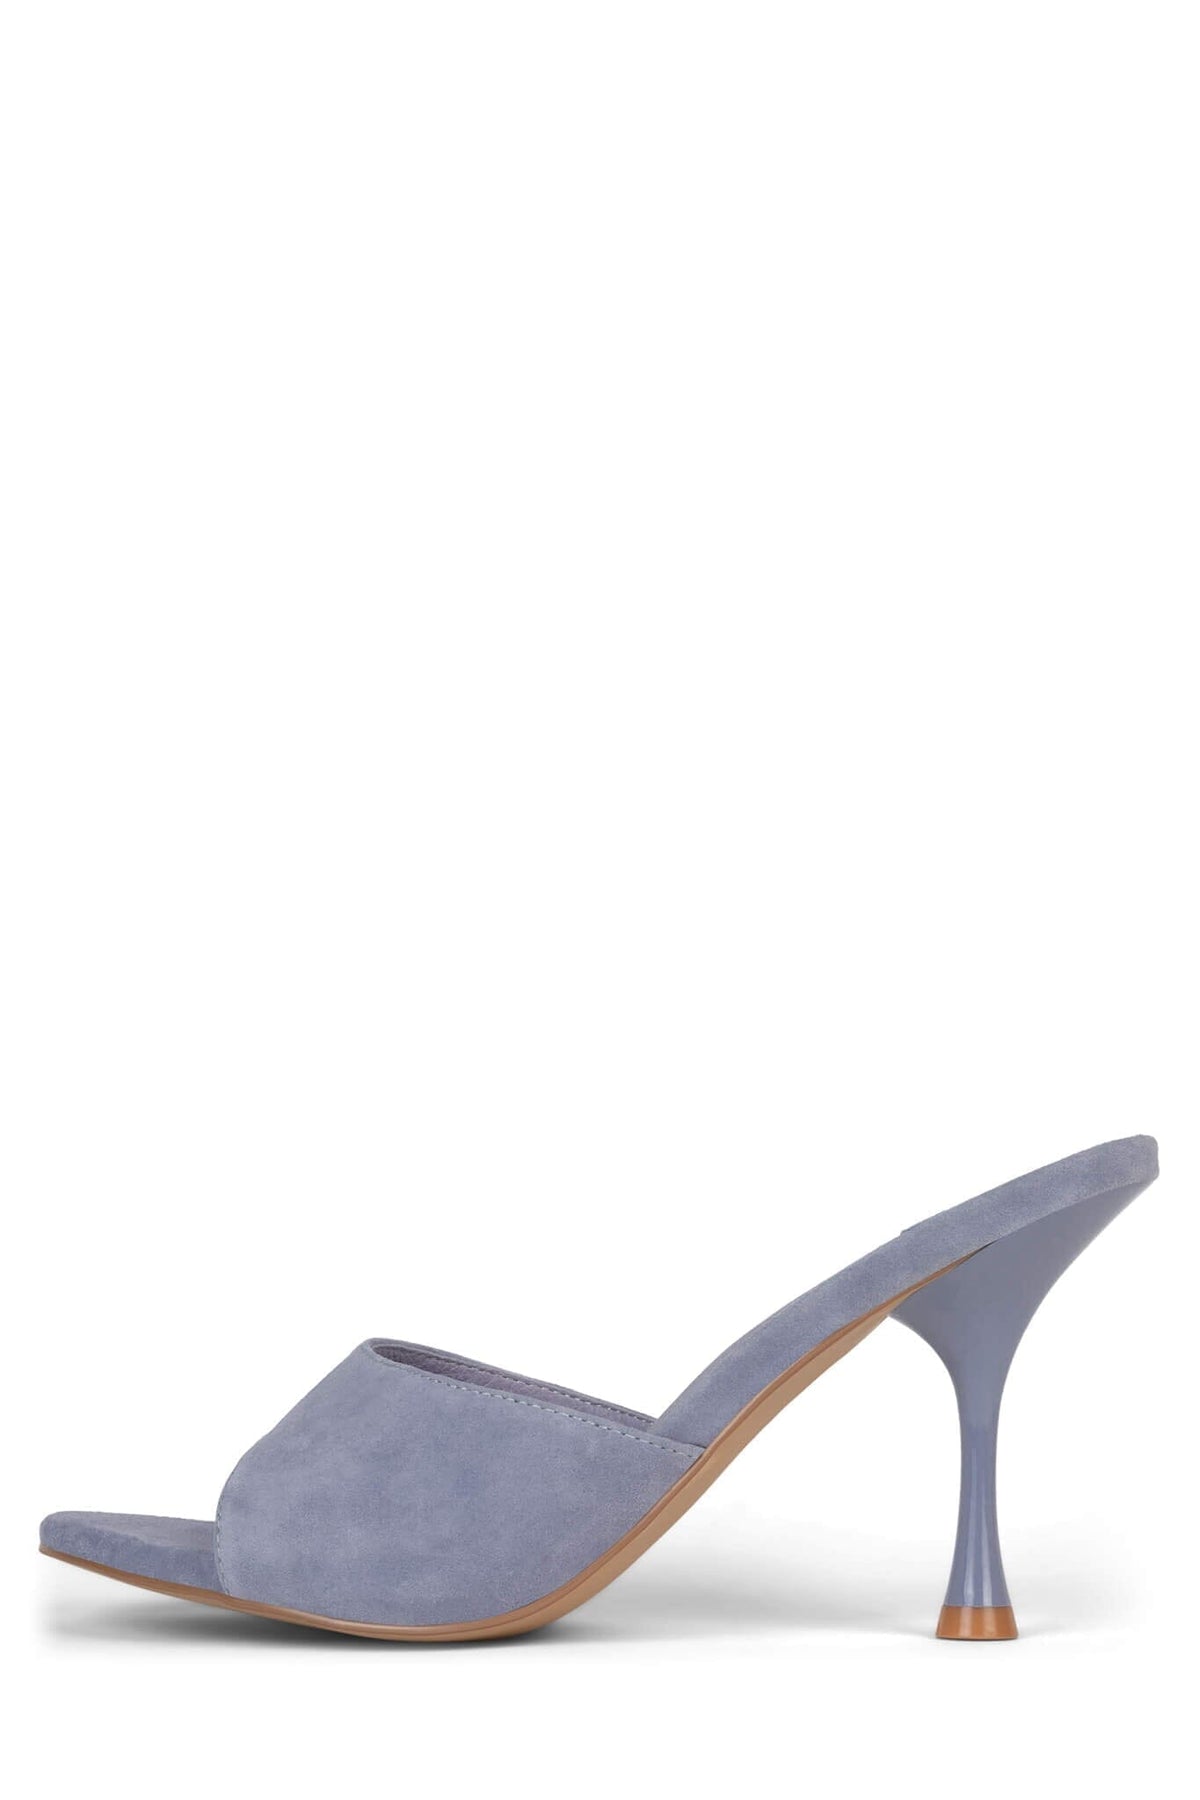 AGENT Jeffrey Campbell Heeled Sandal Dusty Blue Suede